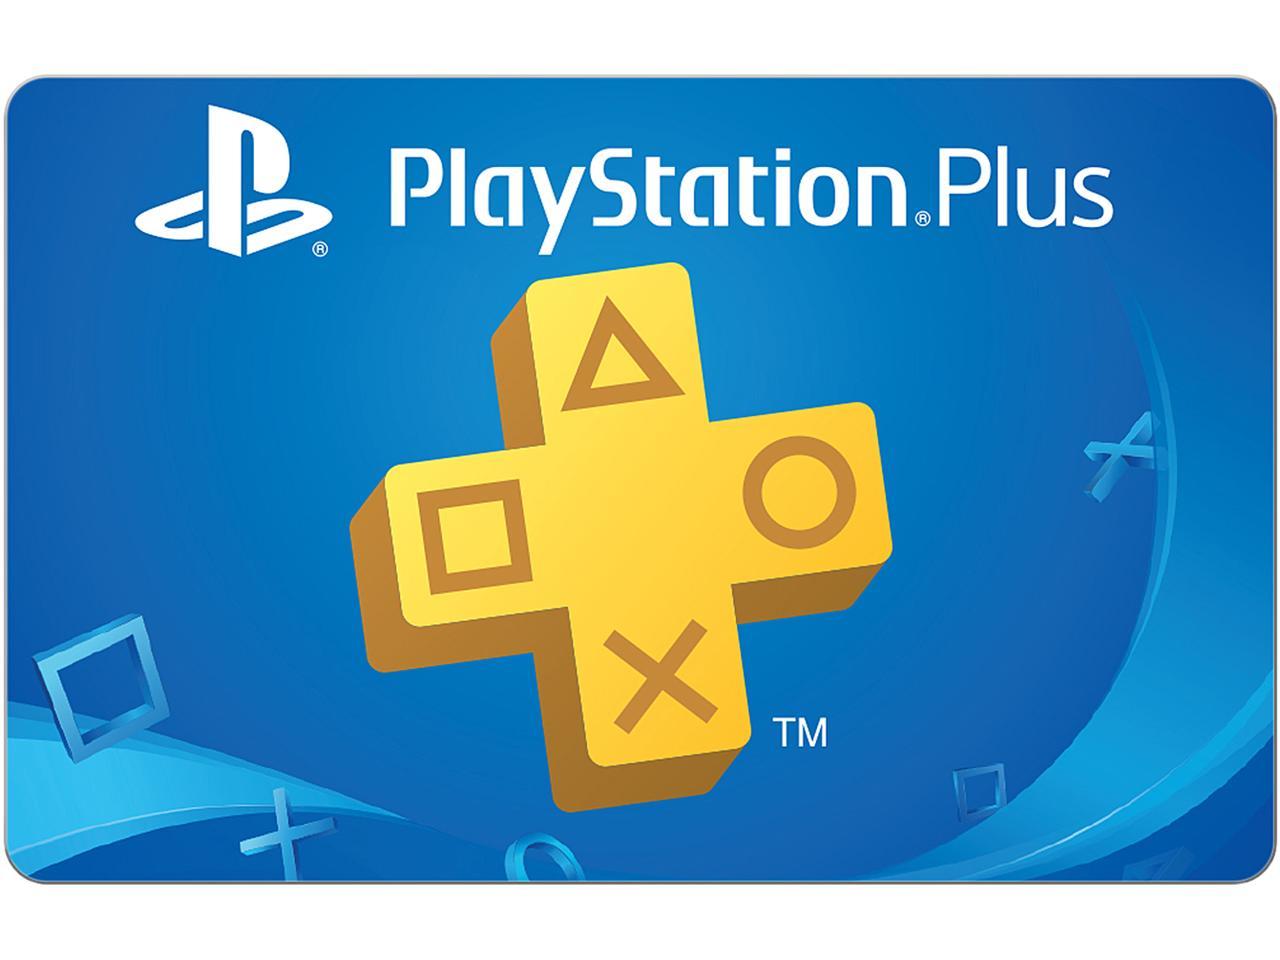 playstation plus for a month